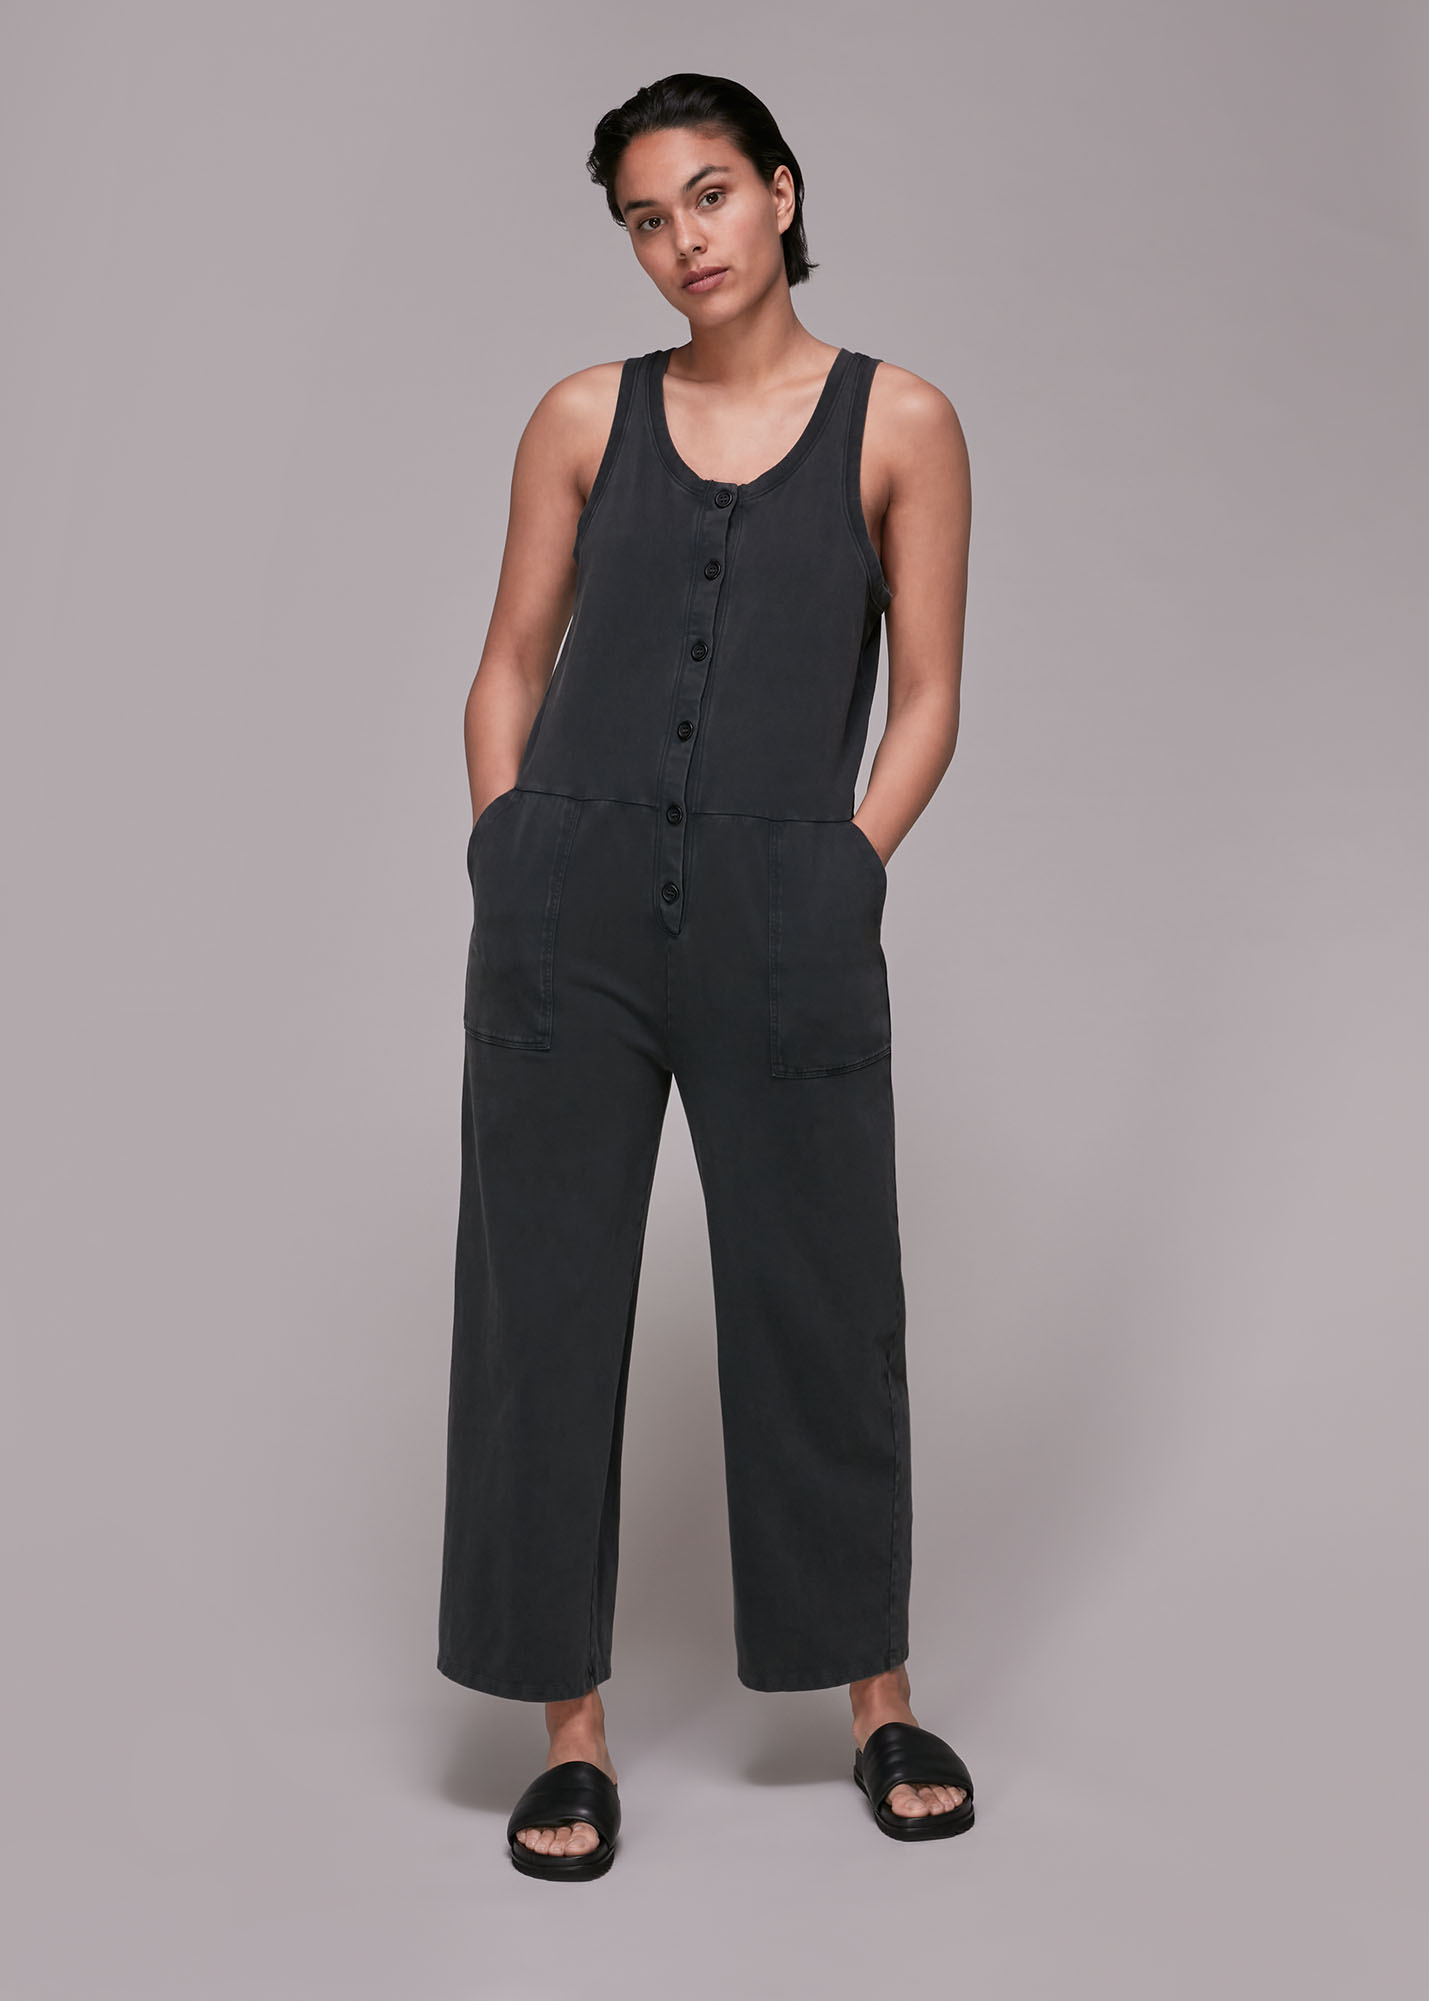 Whistles Women's Jersey Button Front Jumpsuit